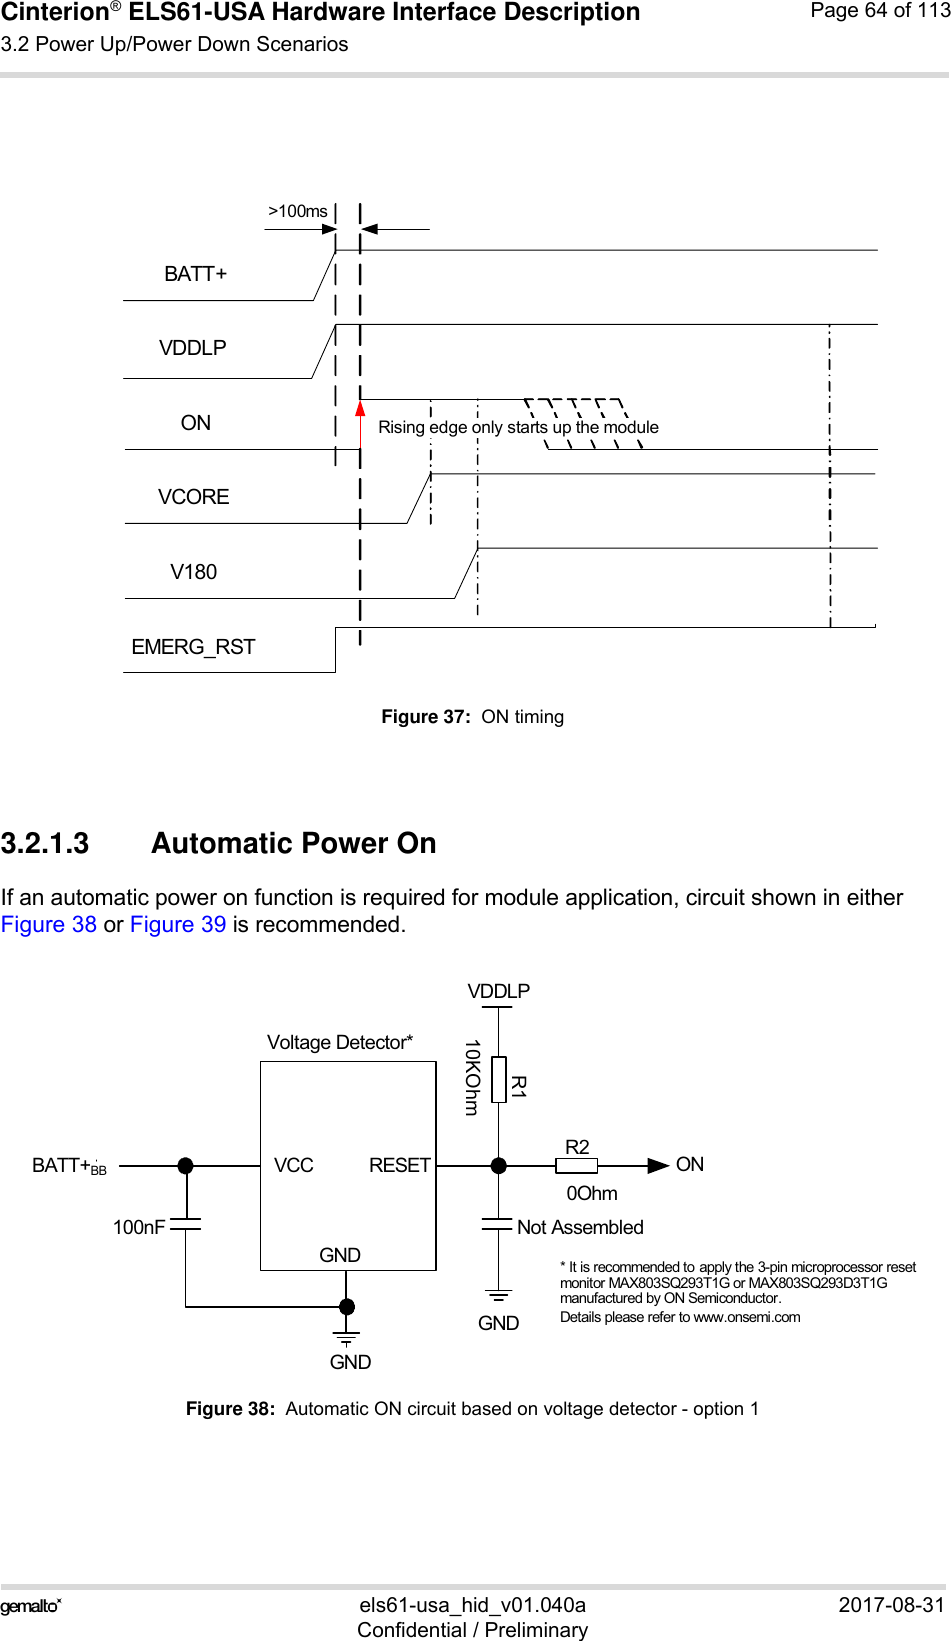 Cinterion® ELS61-USA Hardware Interface Description3.2 Power Up/Power Down Scenarios83els61-usa_hid_v01.040a 2017-08-31Confidential / PreliminaryPage 64 of 113Figure 37:  ON timing3.2.1.3 Automatic Power OnIf an automatic power on function is required for module application, circuit shown in eitherFigure 38 or Figure 39 is recommended.Figure 38:  Automatic ON circuit based on voltage detector - option 1BATT+ONEMERG_RSTV180VCOREVDDLPRising edge only starts up the module&gt;100msVoltage Detector*BATT+BBGNDONVDDLPGND* It is recommended to apply the 3-pin microprocessor reset monitor MAX803SQ293T1G or MAX803SQ293D3T1Gmanufactured by ON Semiconductor. Details please refer to www.onsemi.comVCC RESETGND100nF Not AssembledR110KOhmR20Ohm